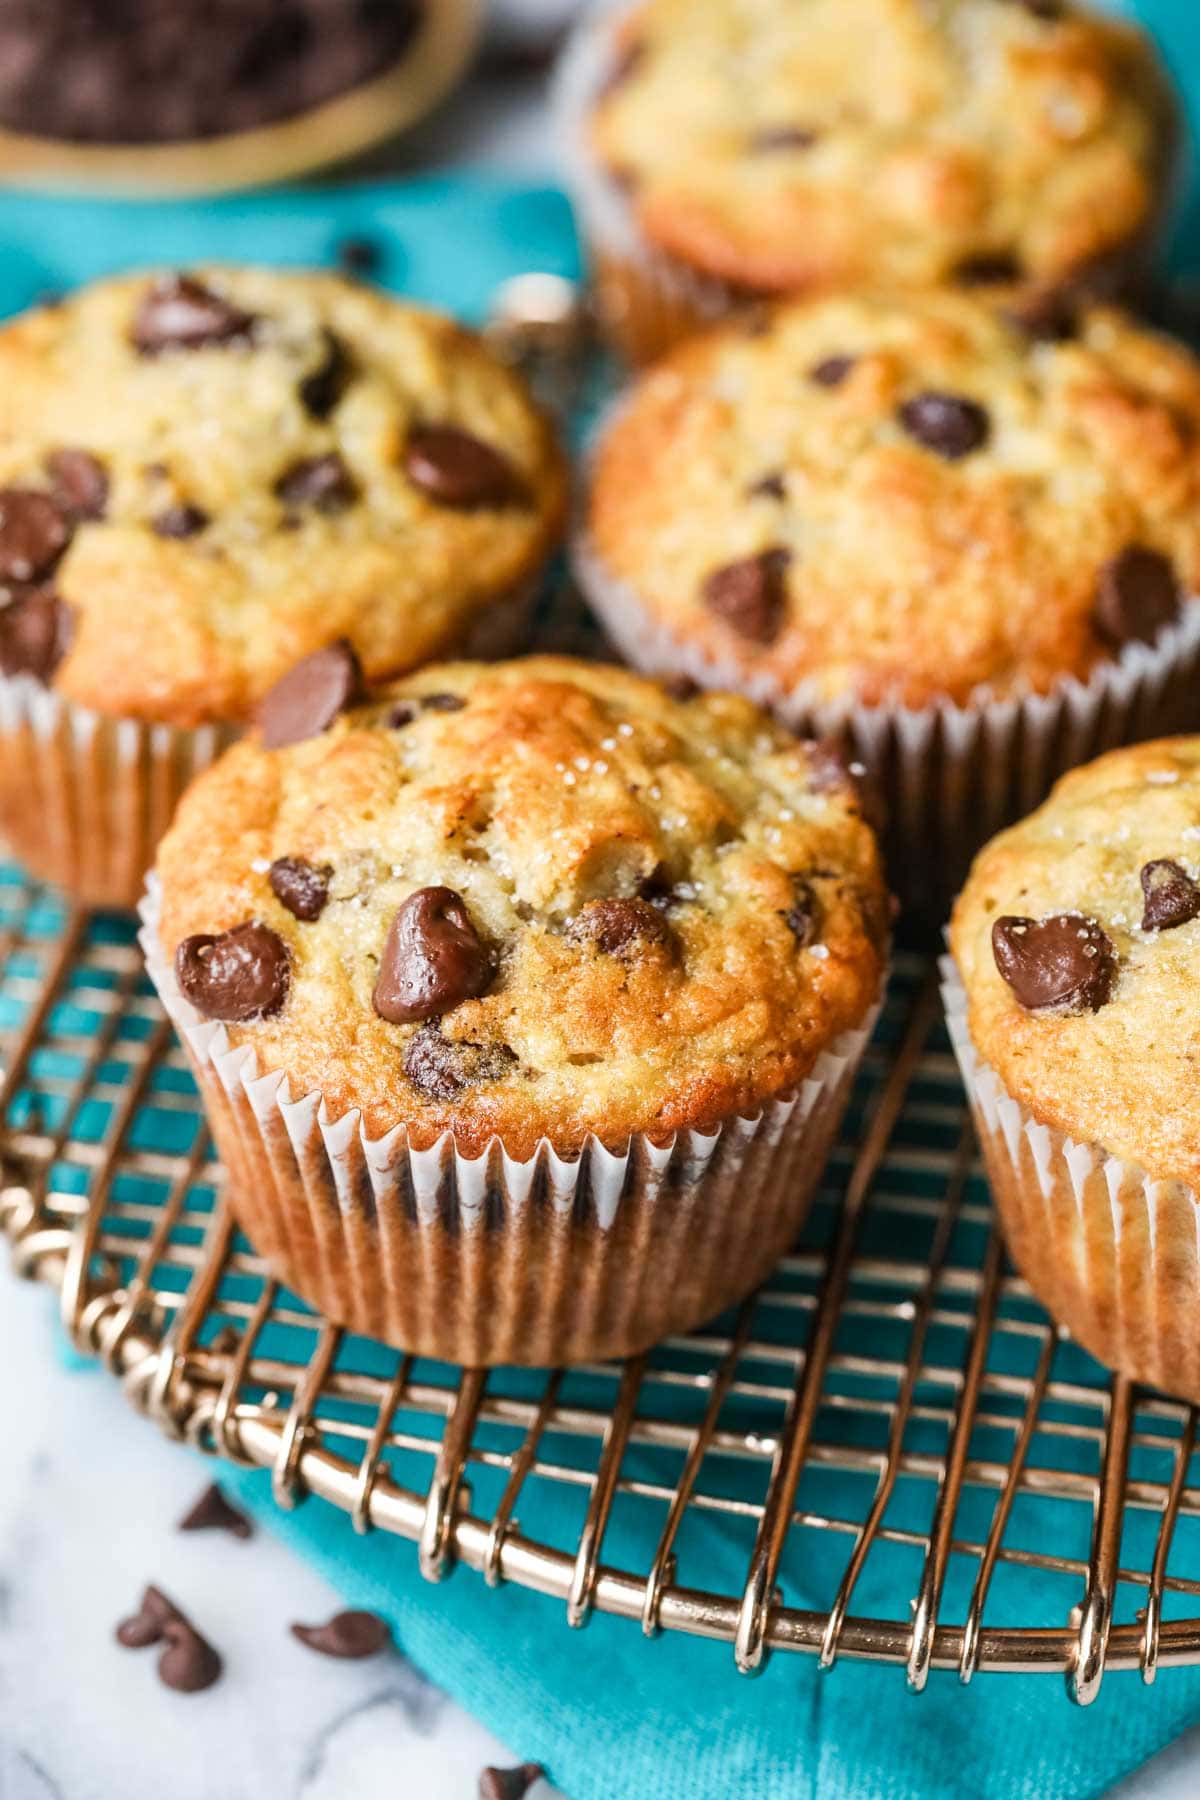 Chocolate chip banana muffins on a cooling rack.